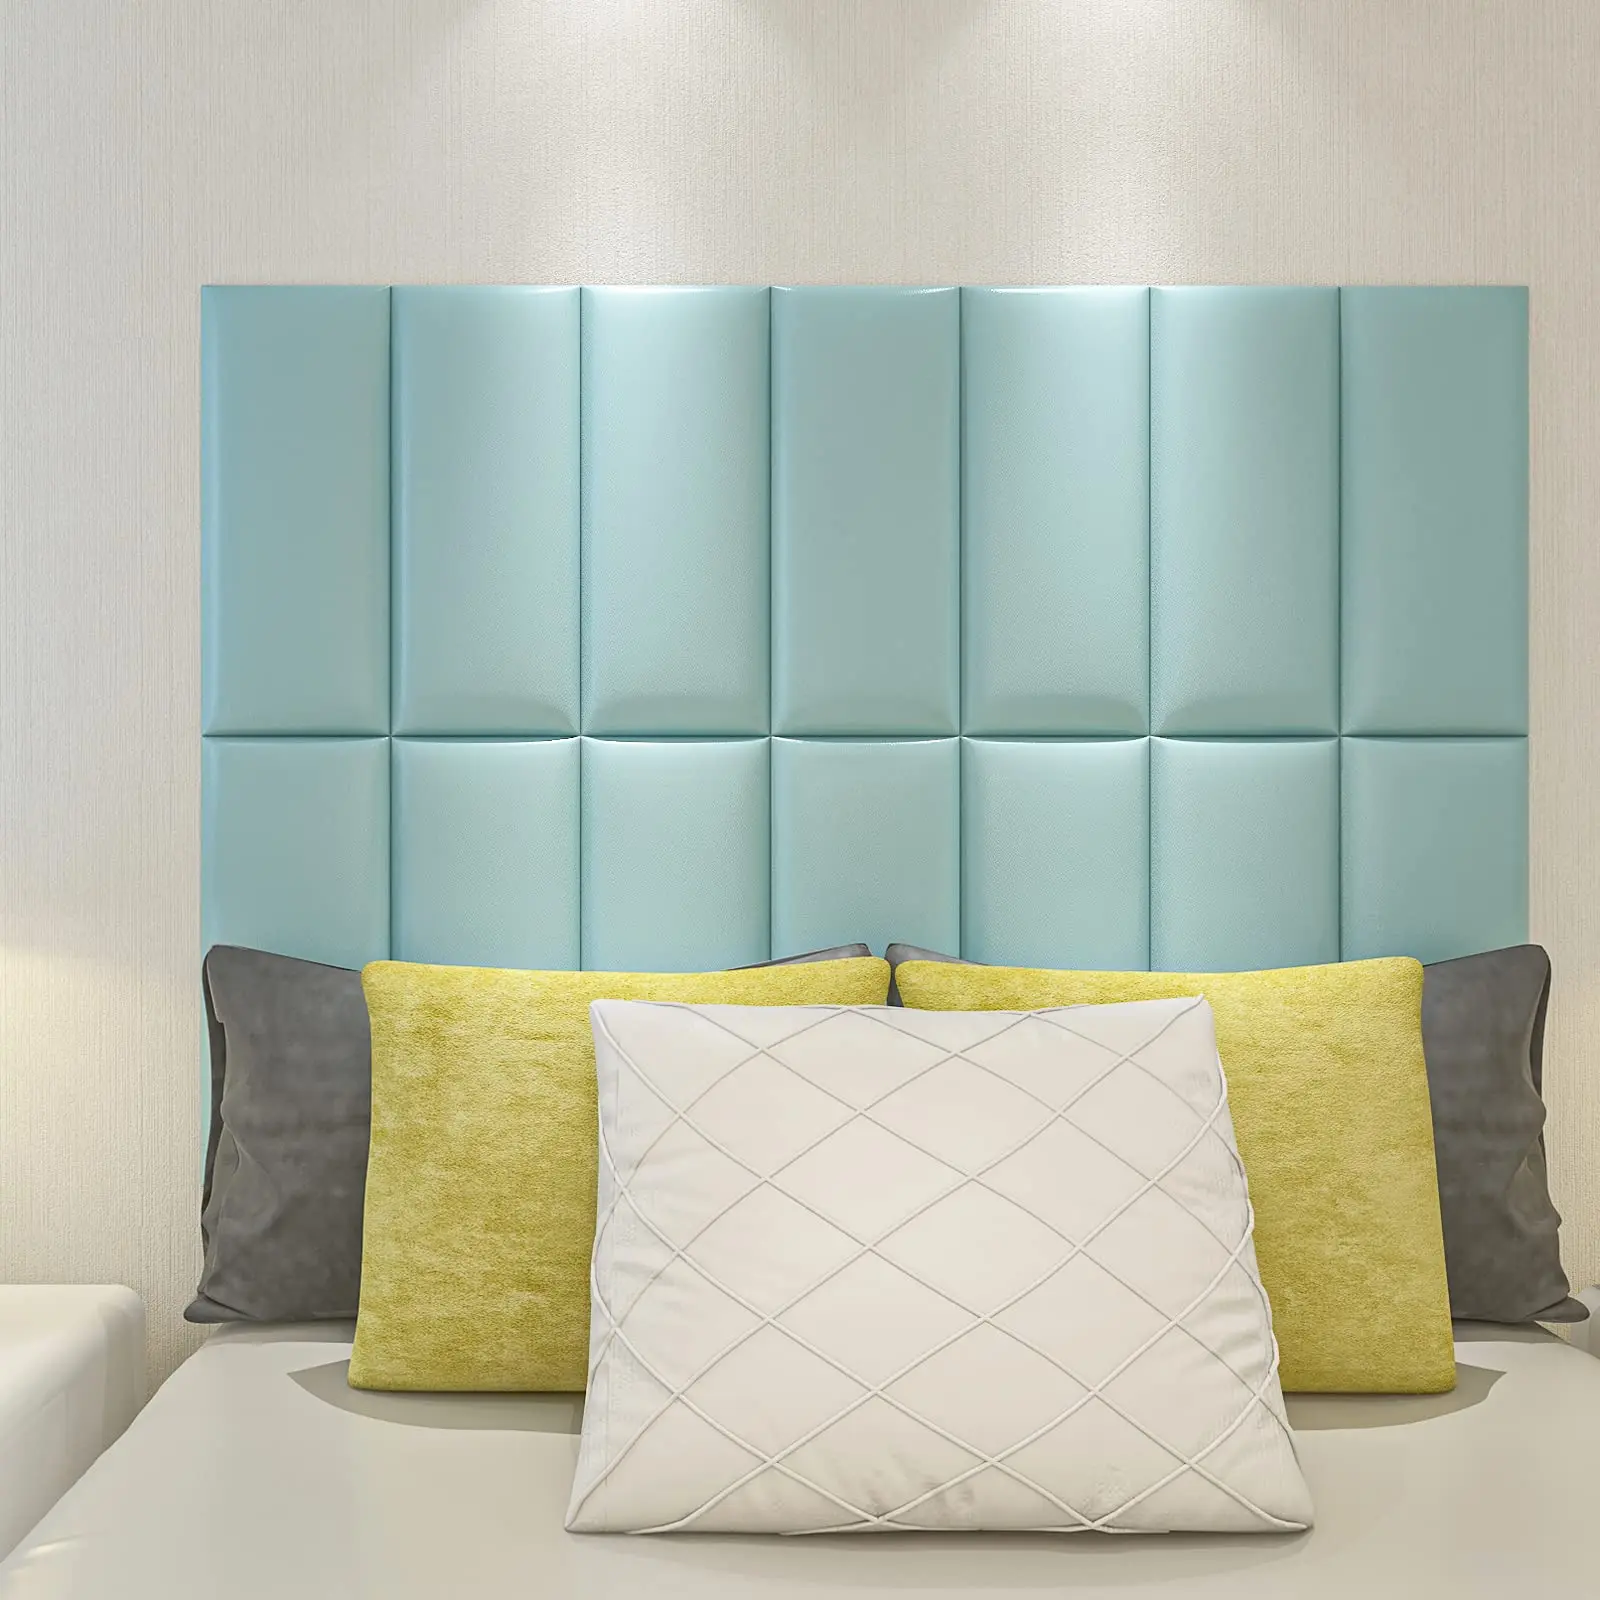 Art3d 9PCS Peel and Stick Headboard for Twin in Teal, Sized 25 x 60cm , 3D Upholstered Wall Panels art3d 12pcs peel and stick headboard for twin in grey sized 25 x 60cm 3d upholstered wall panels